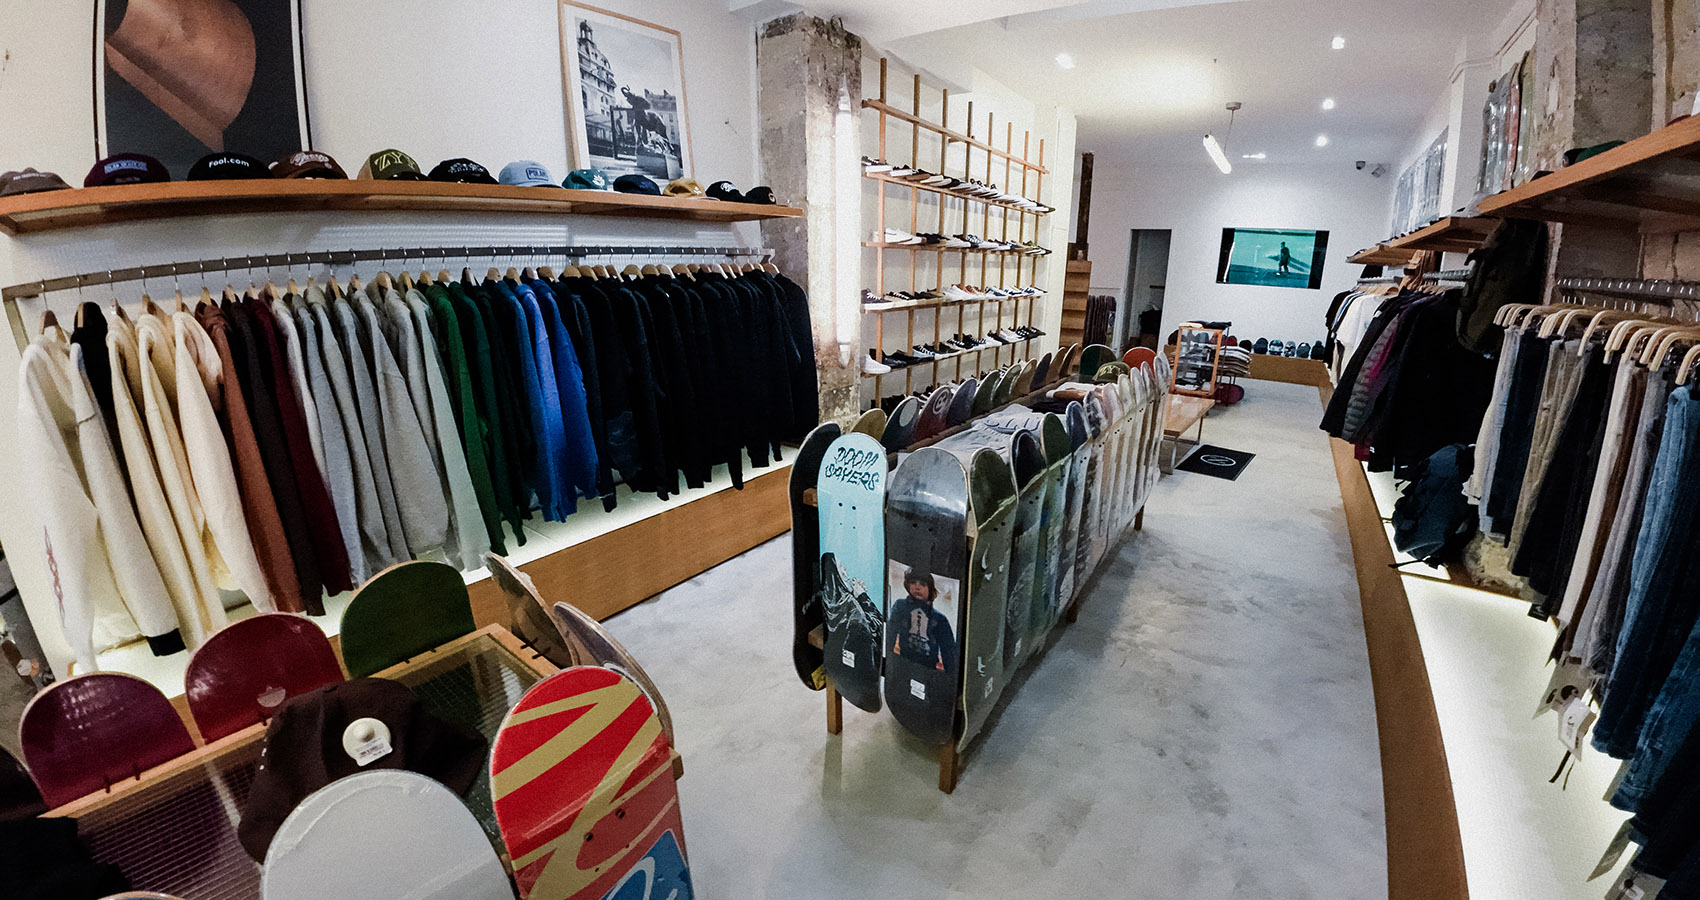 Paris Skate Boutique Owner Reflects on 20 Years of Skateboarding Culture